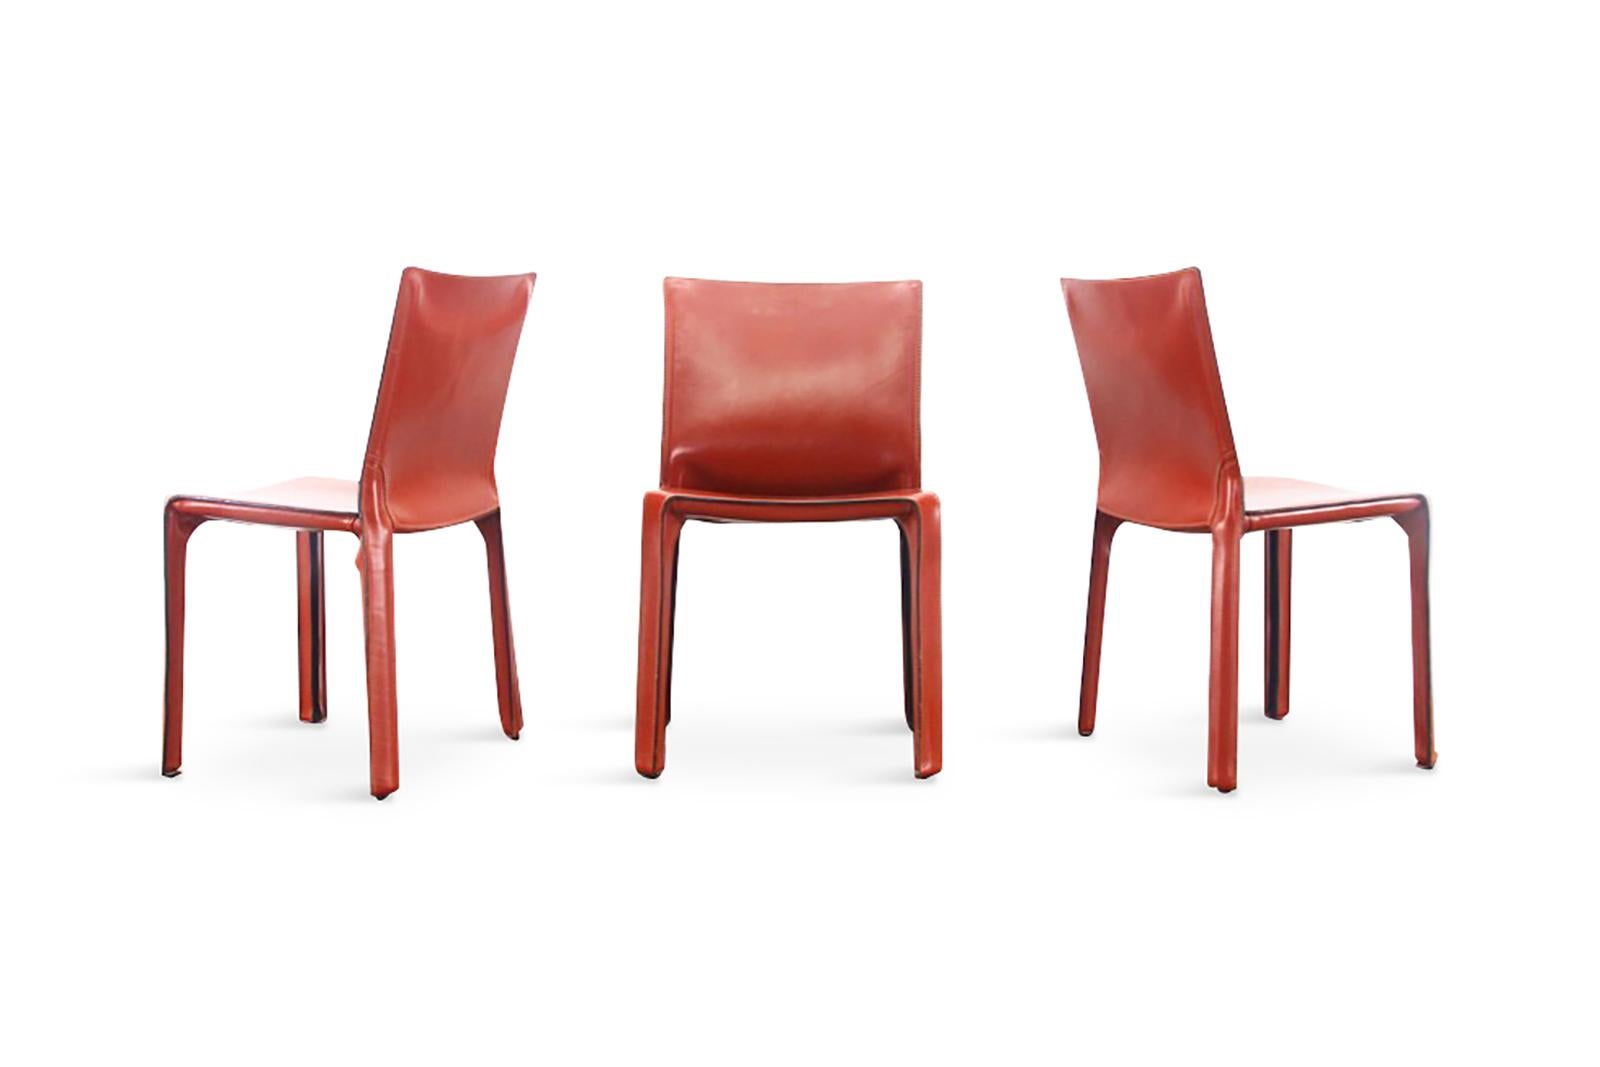 Mario Bellini Cab Chairs in Oxblood Red Leather for Cassina, 1977 1